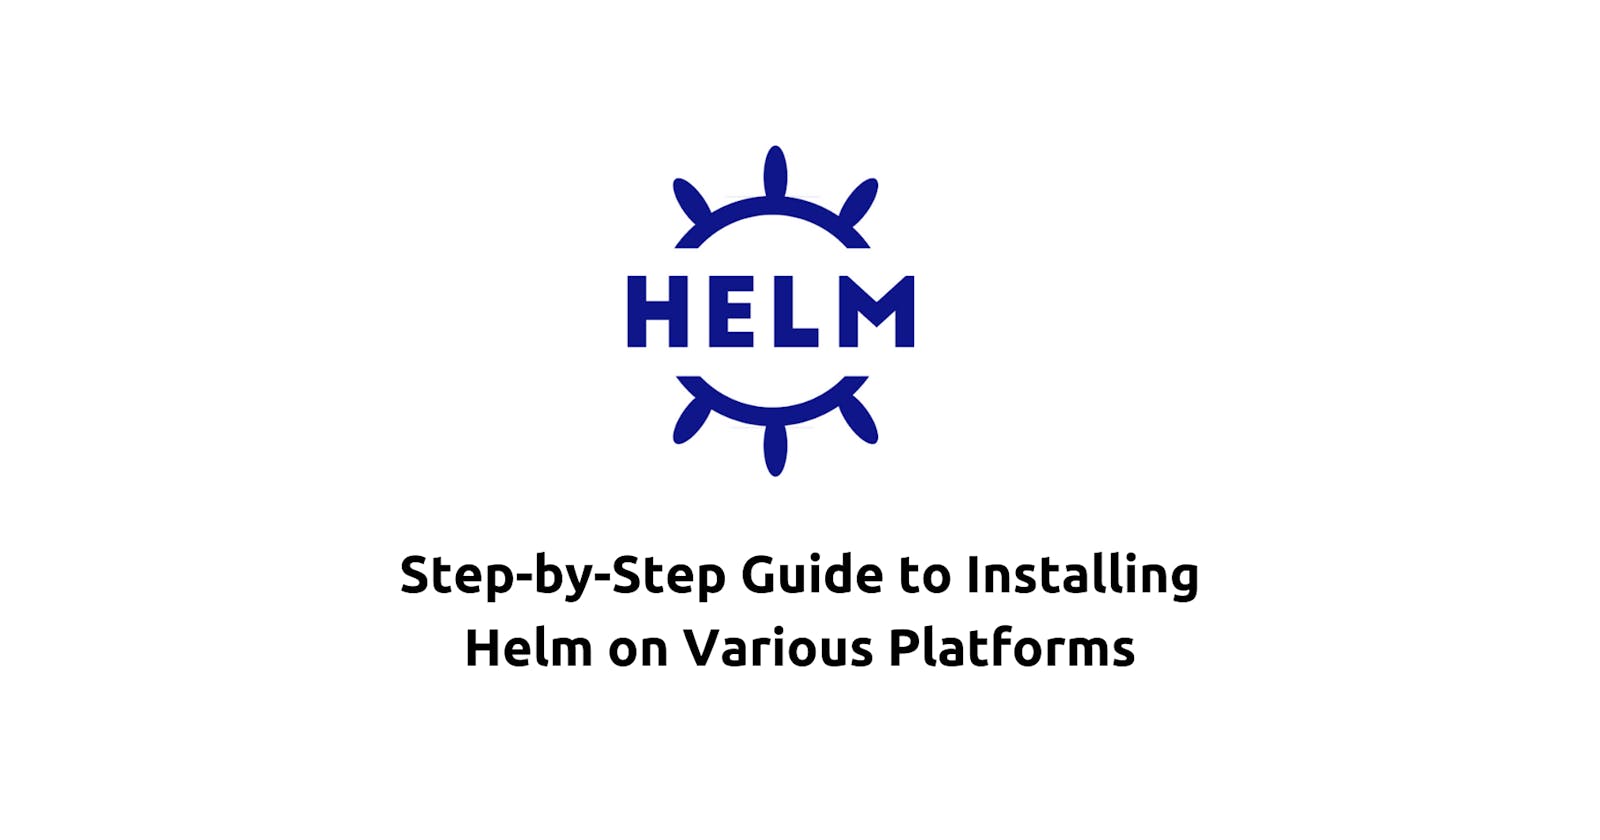 Step-by-Step Guide to Installing Helm on Various Platforms